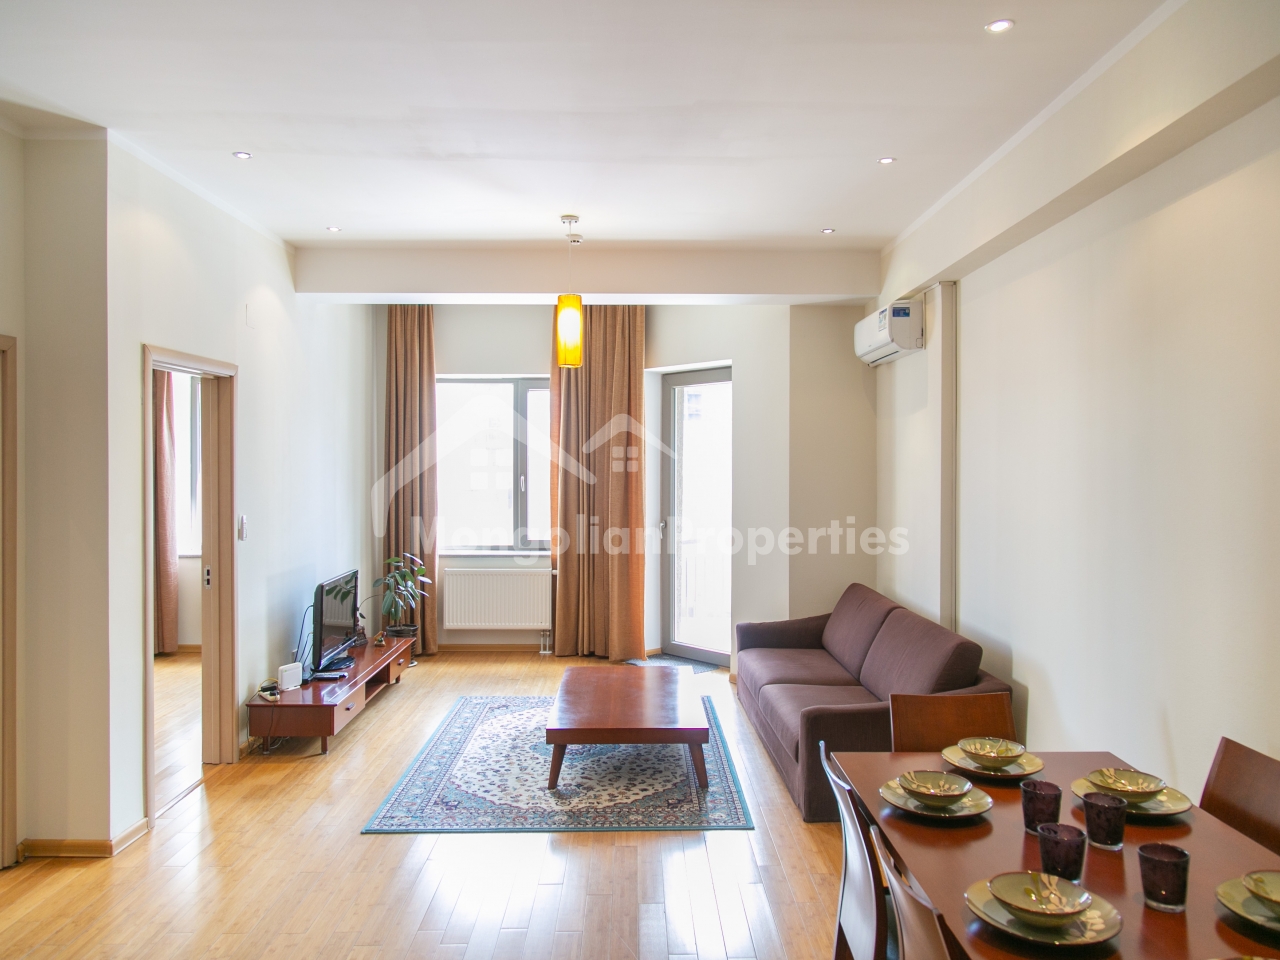 FOR RENT: FULLY FURNISHED, COZY 2 BEDROOM APARTMENT AT REGENCY RESIDENCE